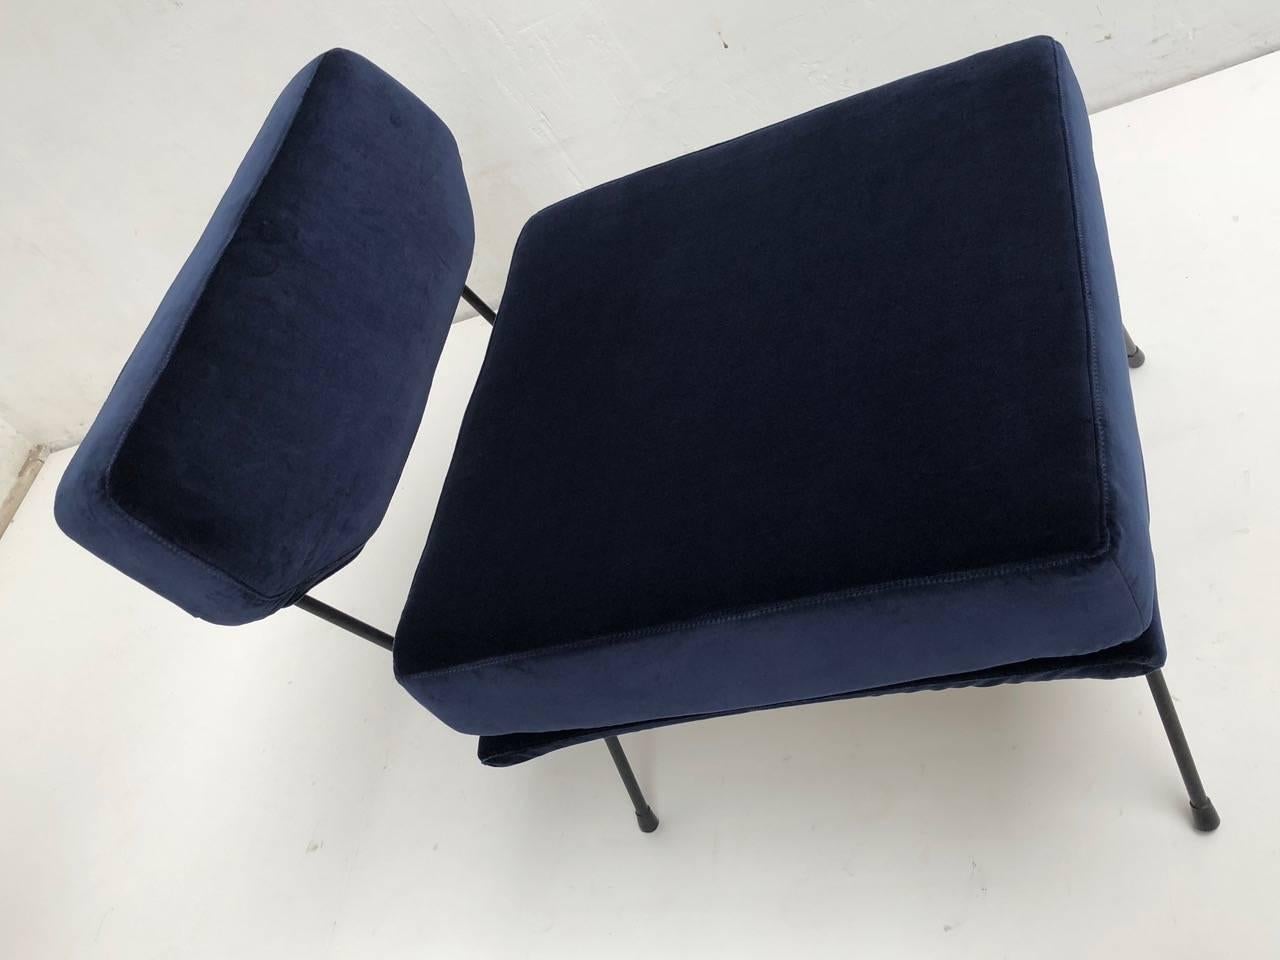 Pair of 'Elettra' Lounge Chairs by BBPR , Arflex, Italy 1953, Compasso D'Oro 1954 4